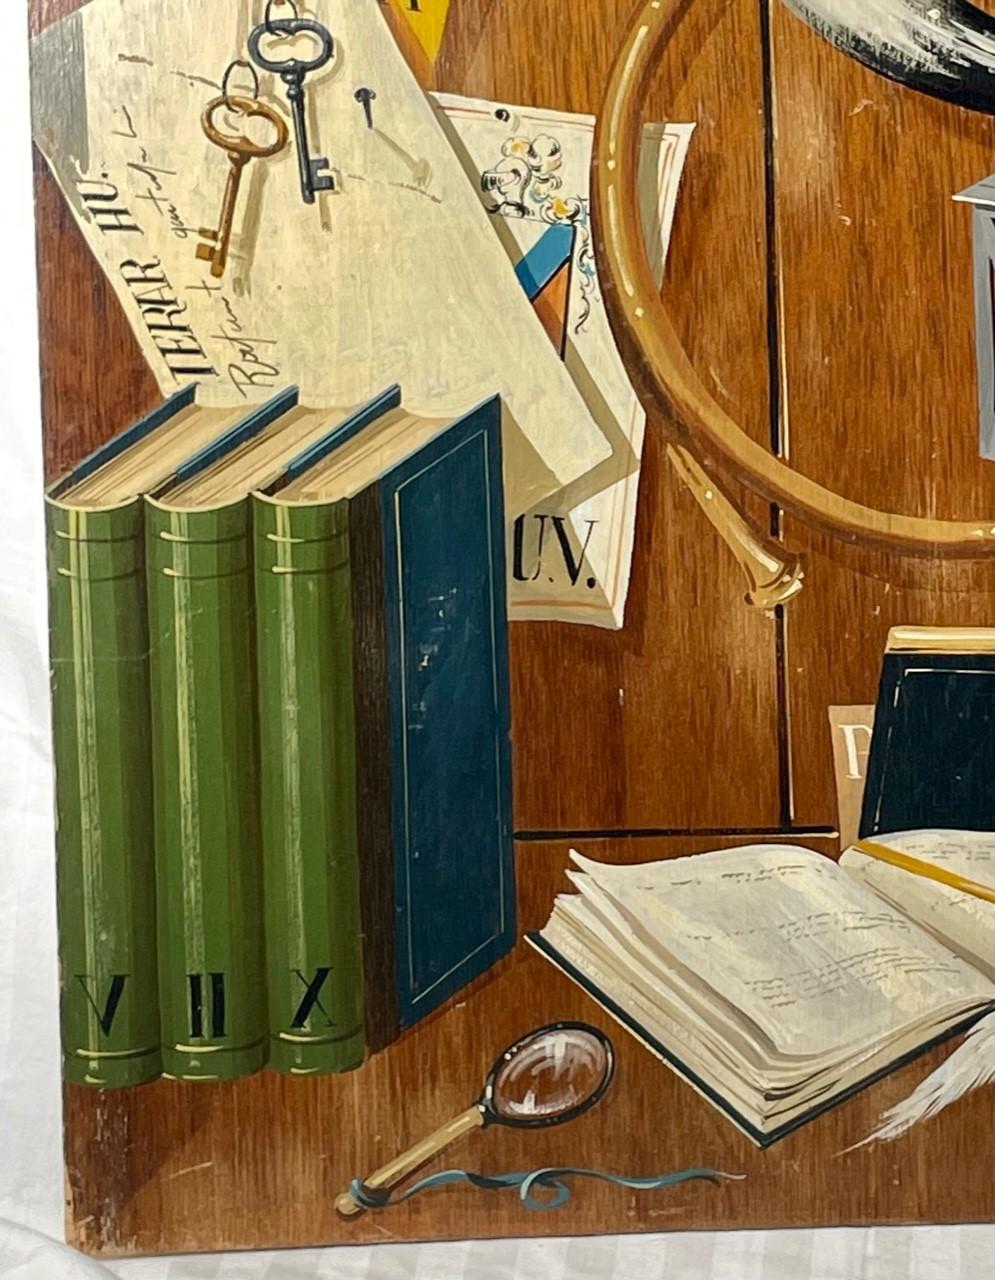 Trompe L'oeil Hyperrealism oil painting abstract surrealist photo realist art of early country living. 

This charming vintage trompe l’oeil scene is painted on board. The subject matter of the collected objects suggests a humble 19th Century